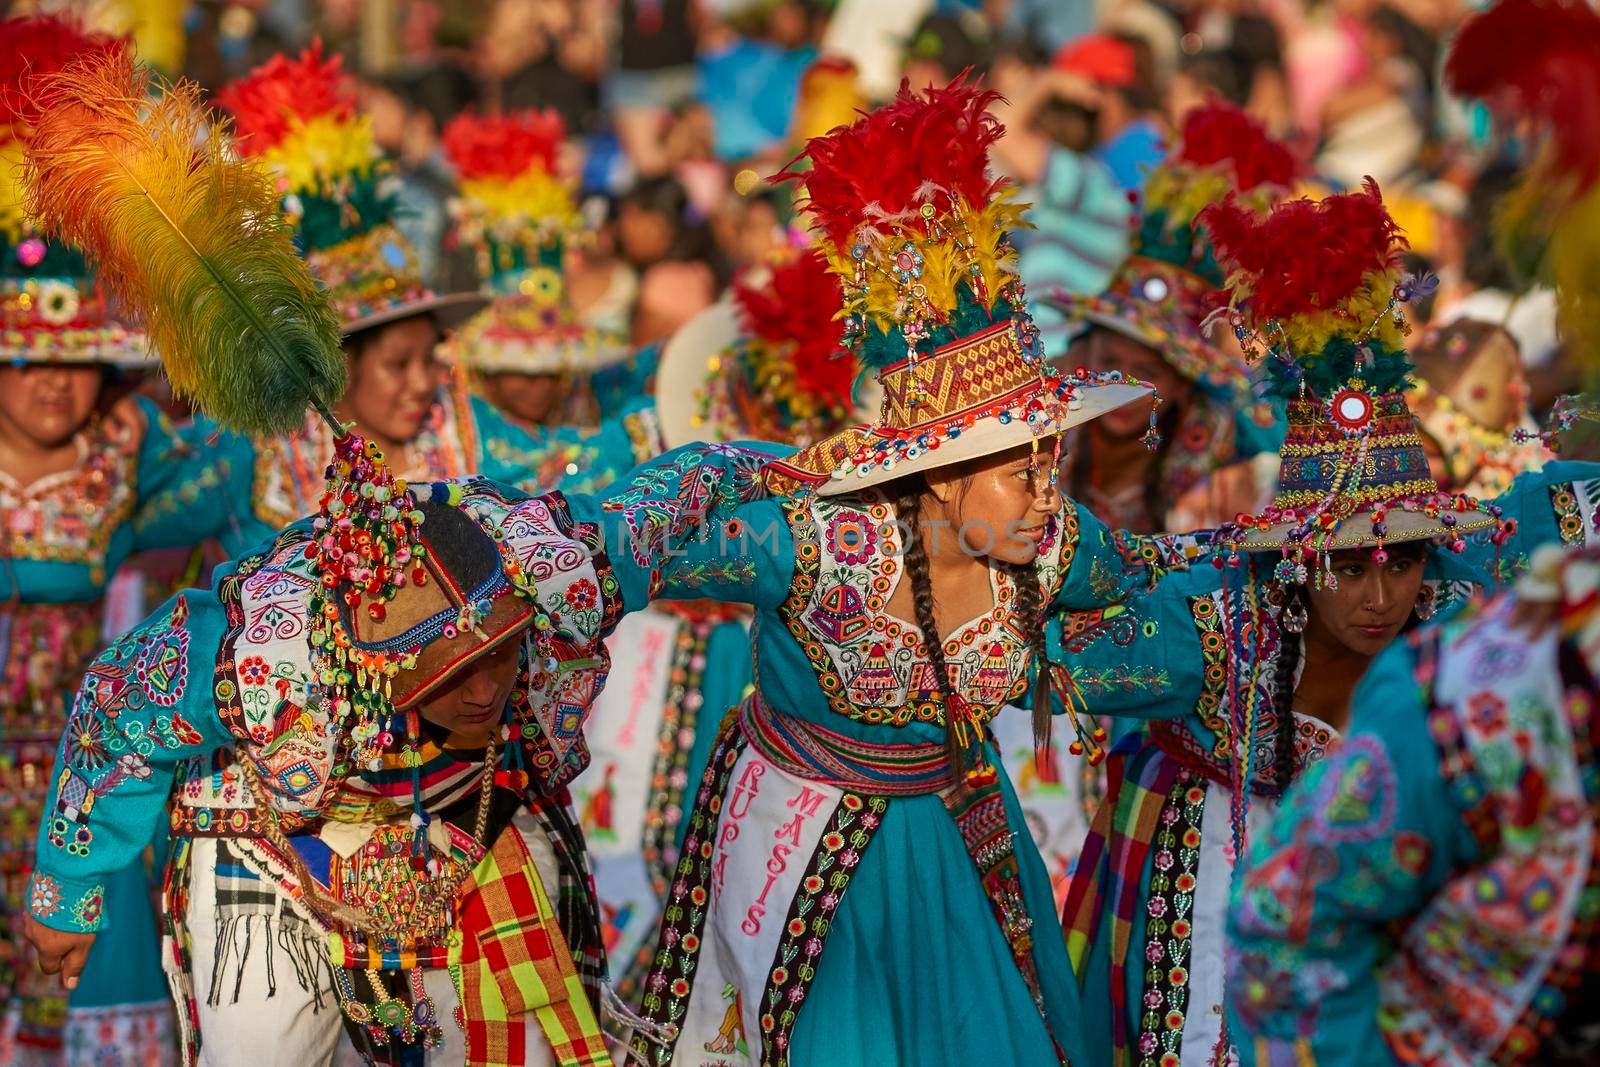 Tinkus dancers at the Arica Carnival by JeremyRichards